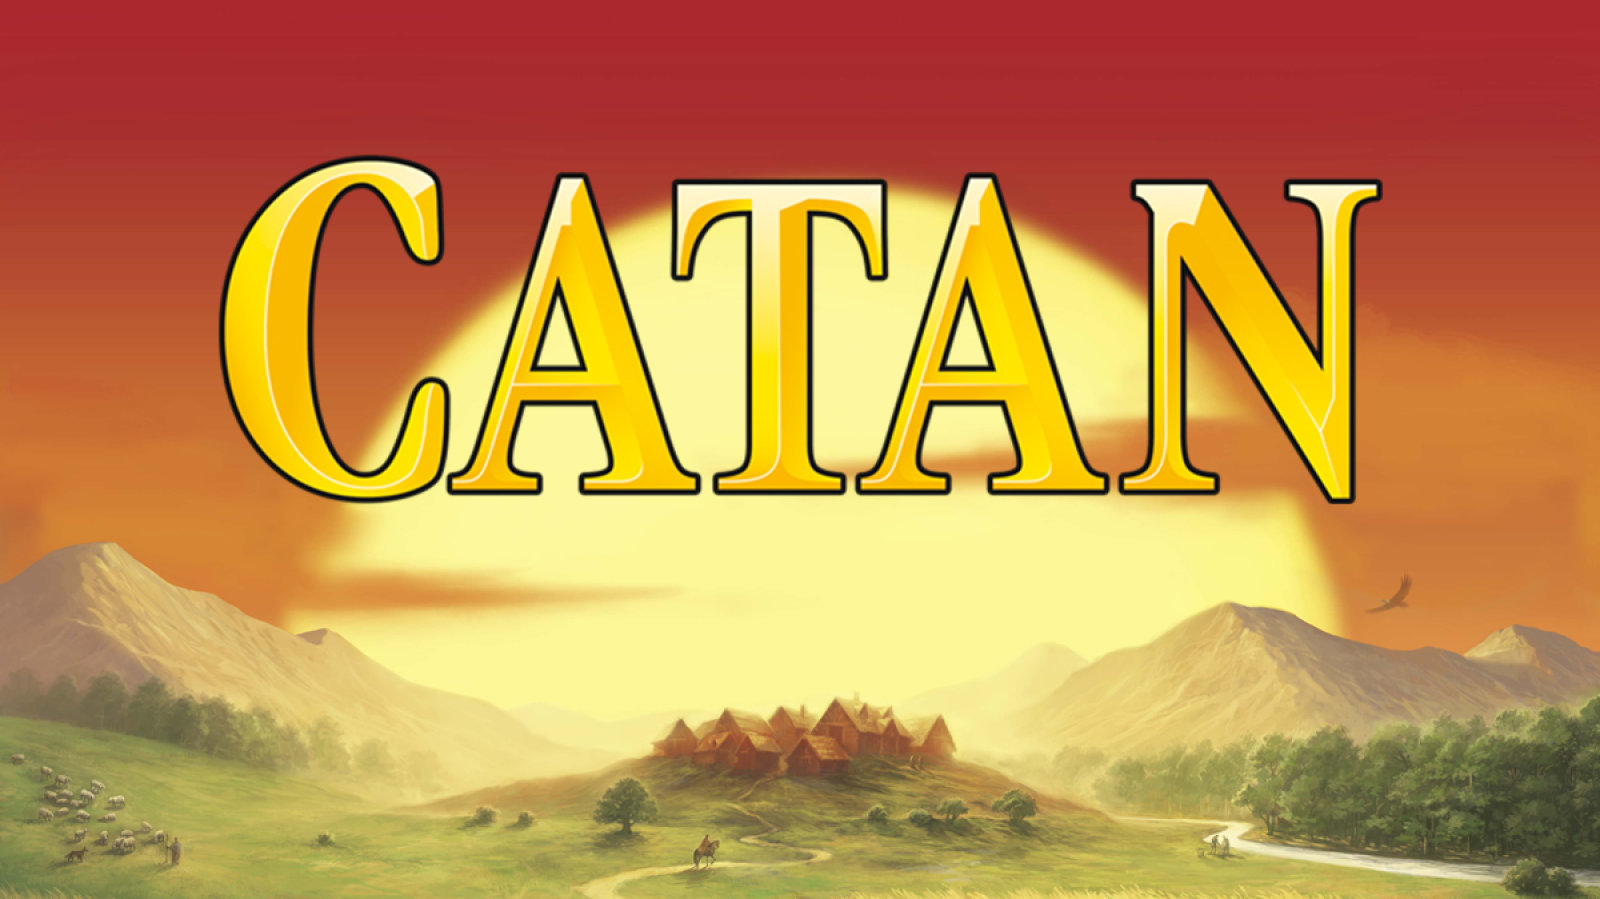 Catan for Nintendo Switch gets official release date - 9to5Toys